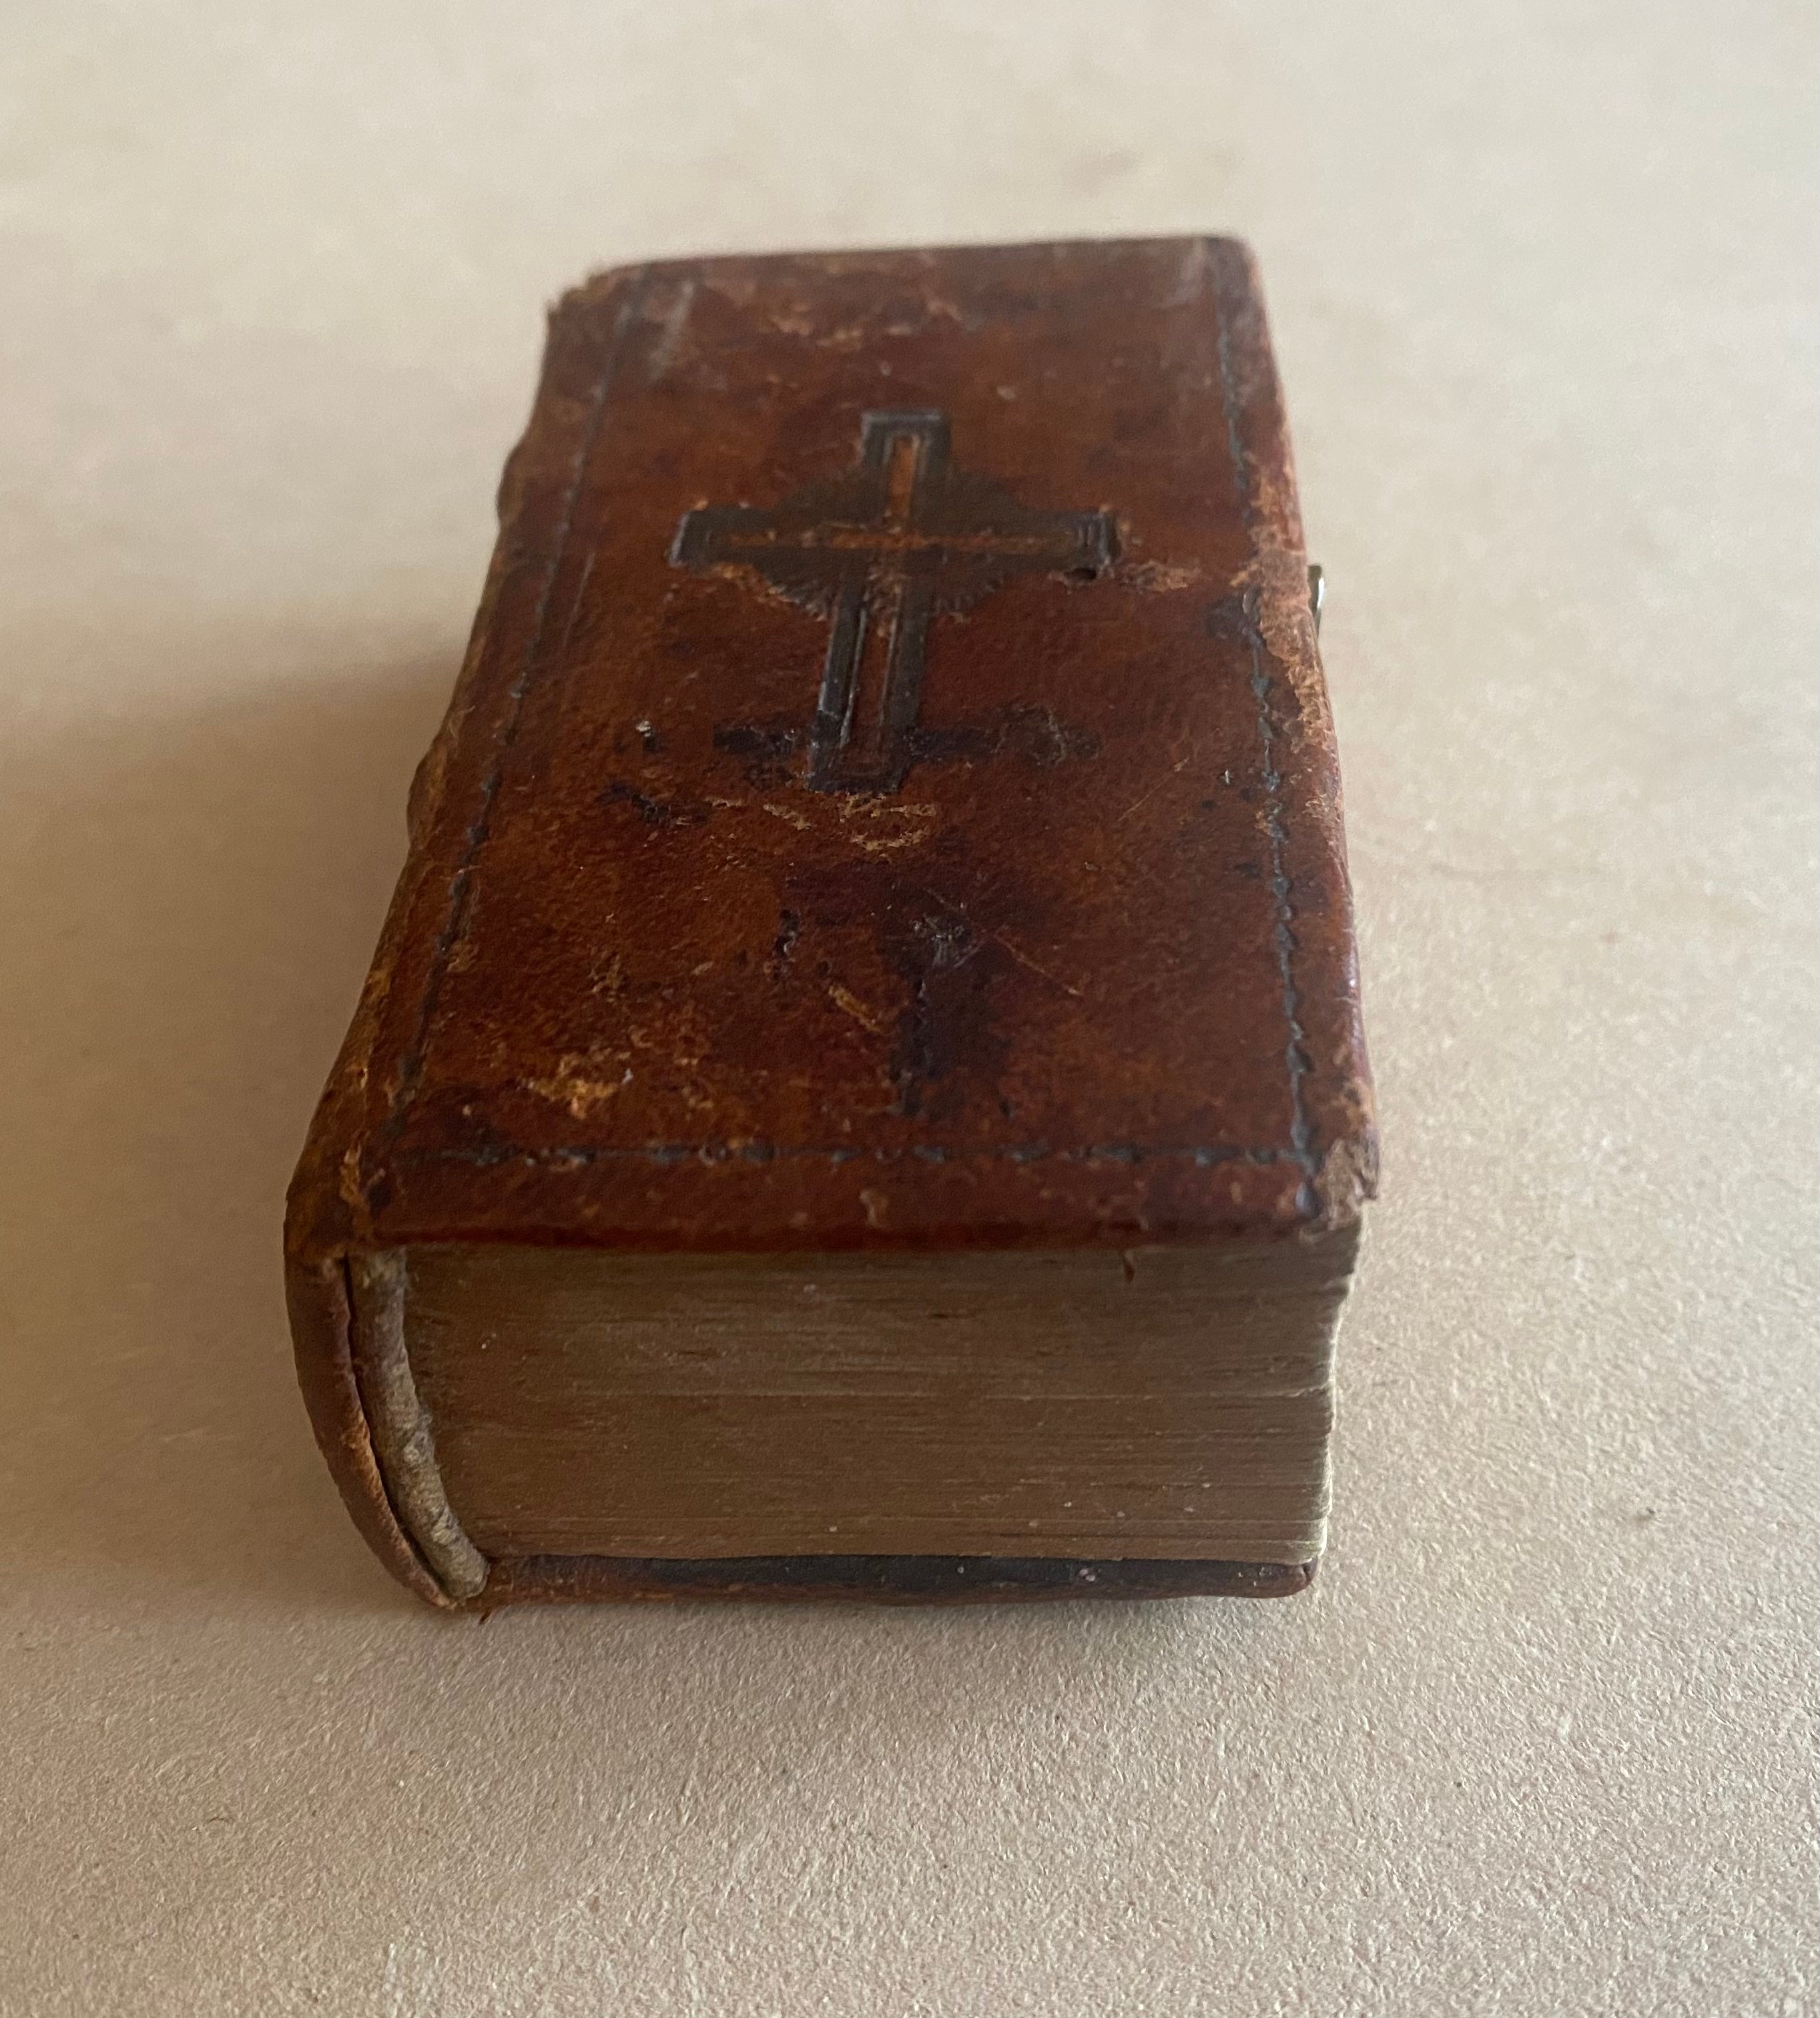 Antique miniature book, Old Testament “ PROPHETAE “ by Apud Bernard Gualteri 1632 Colonia Agrippina ( Cologne, Germany ).